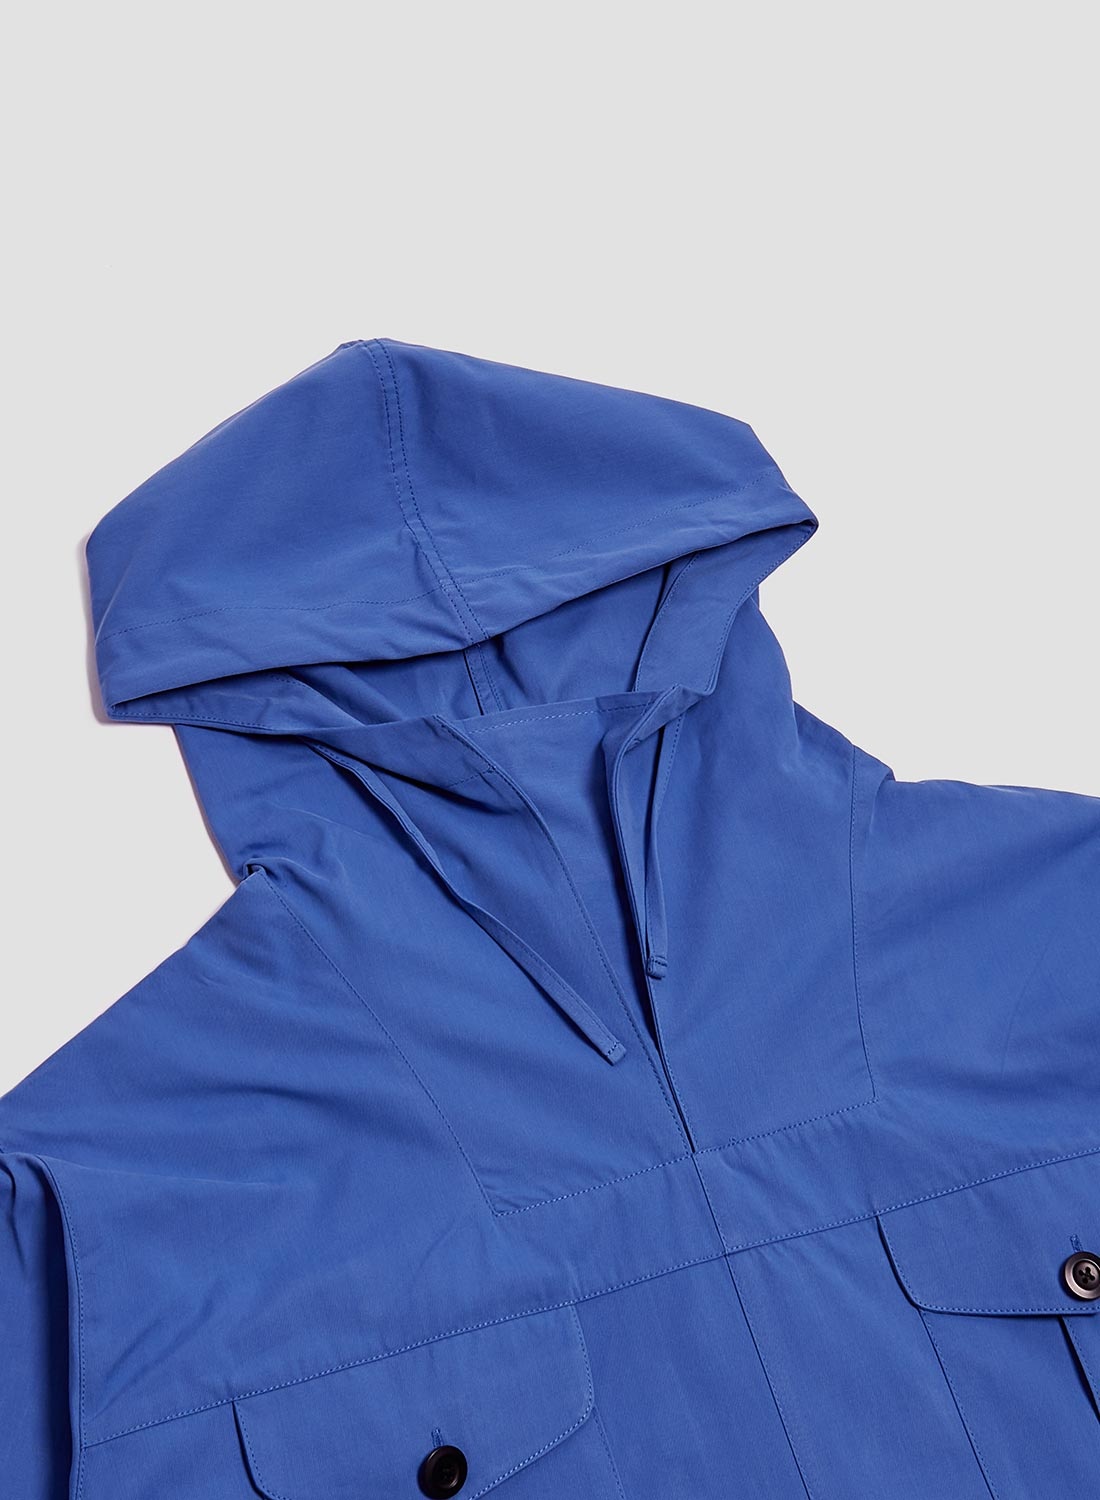 British Army Smock In Blue - 2